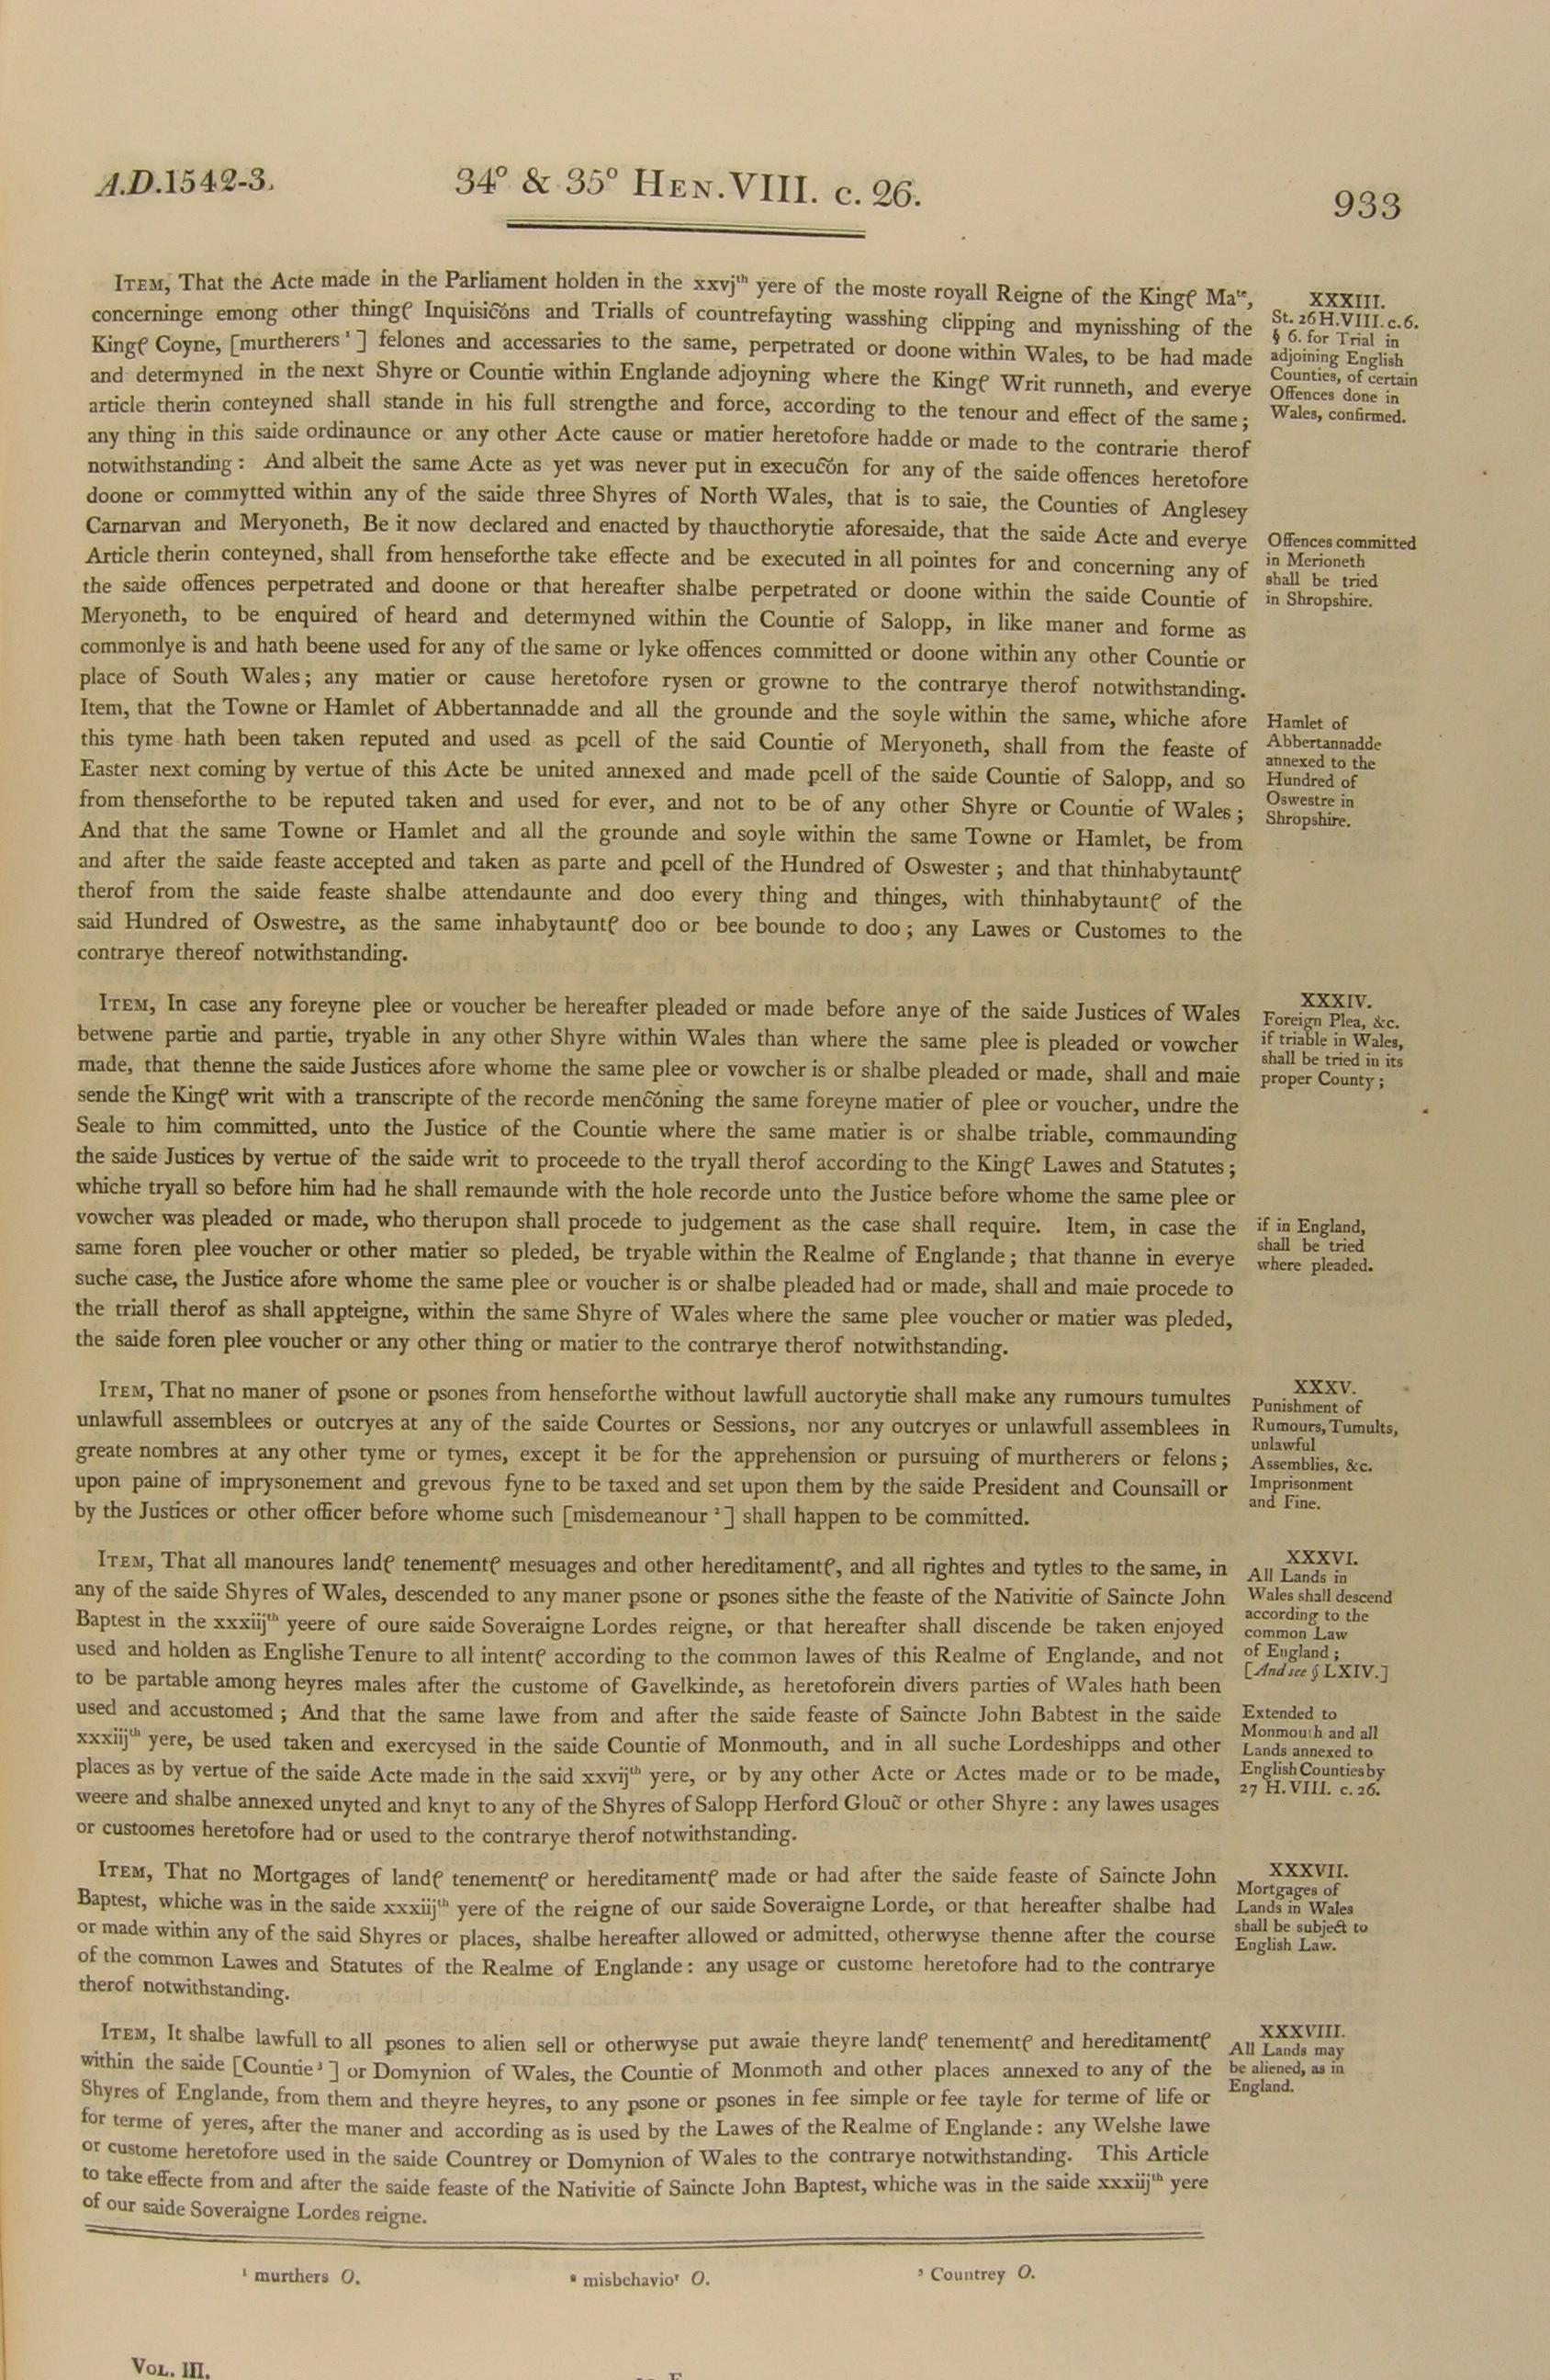 Image of 34 & 35 Henry VIII, c. 26 (page 8 of 12). Click for larger image.